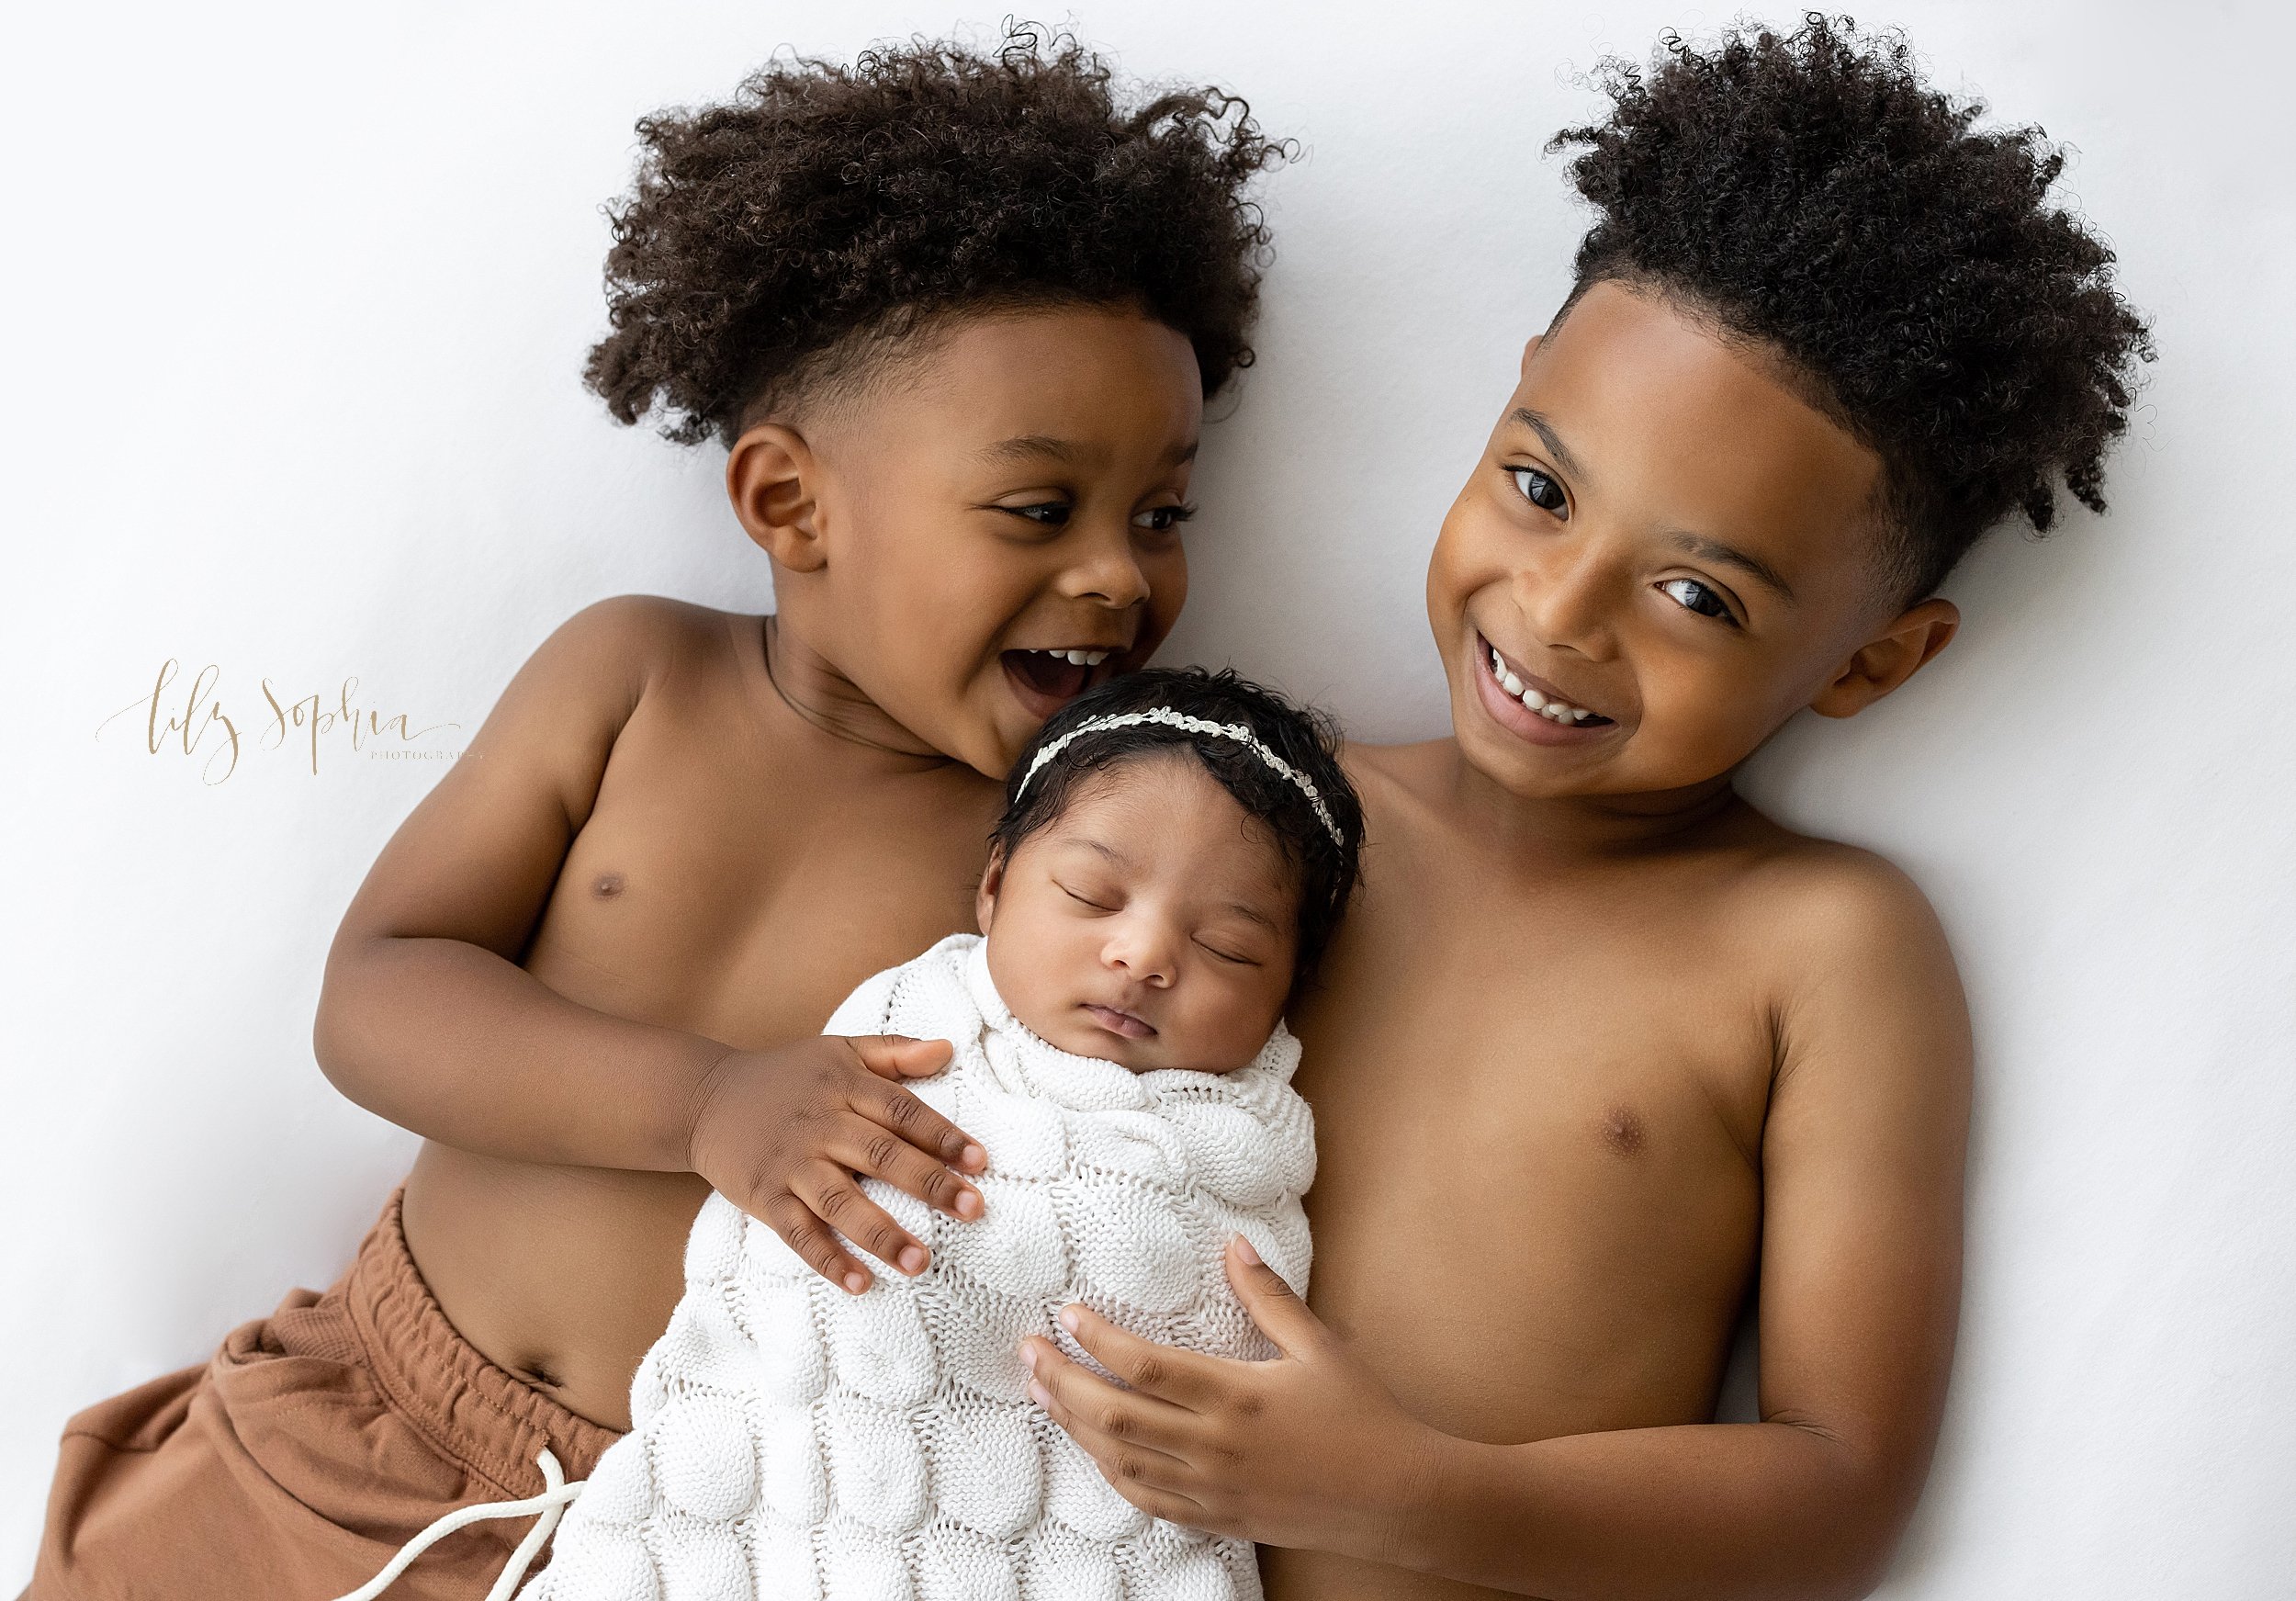  Family newborn portrait of brothers lying on their backs on a bed with their  sleeping newborn baby sister swaddled to her chin with a soft white knitted blanket lying between them taken in a studio near Decatur in Atlanta that uses natural lighting